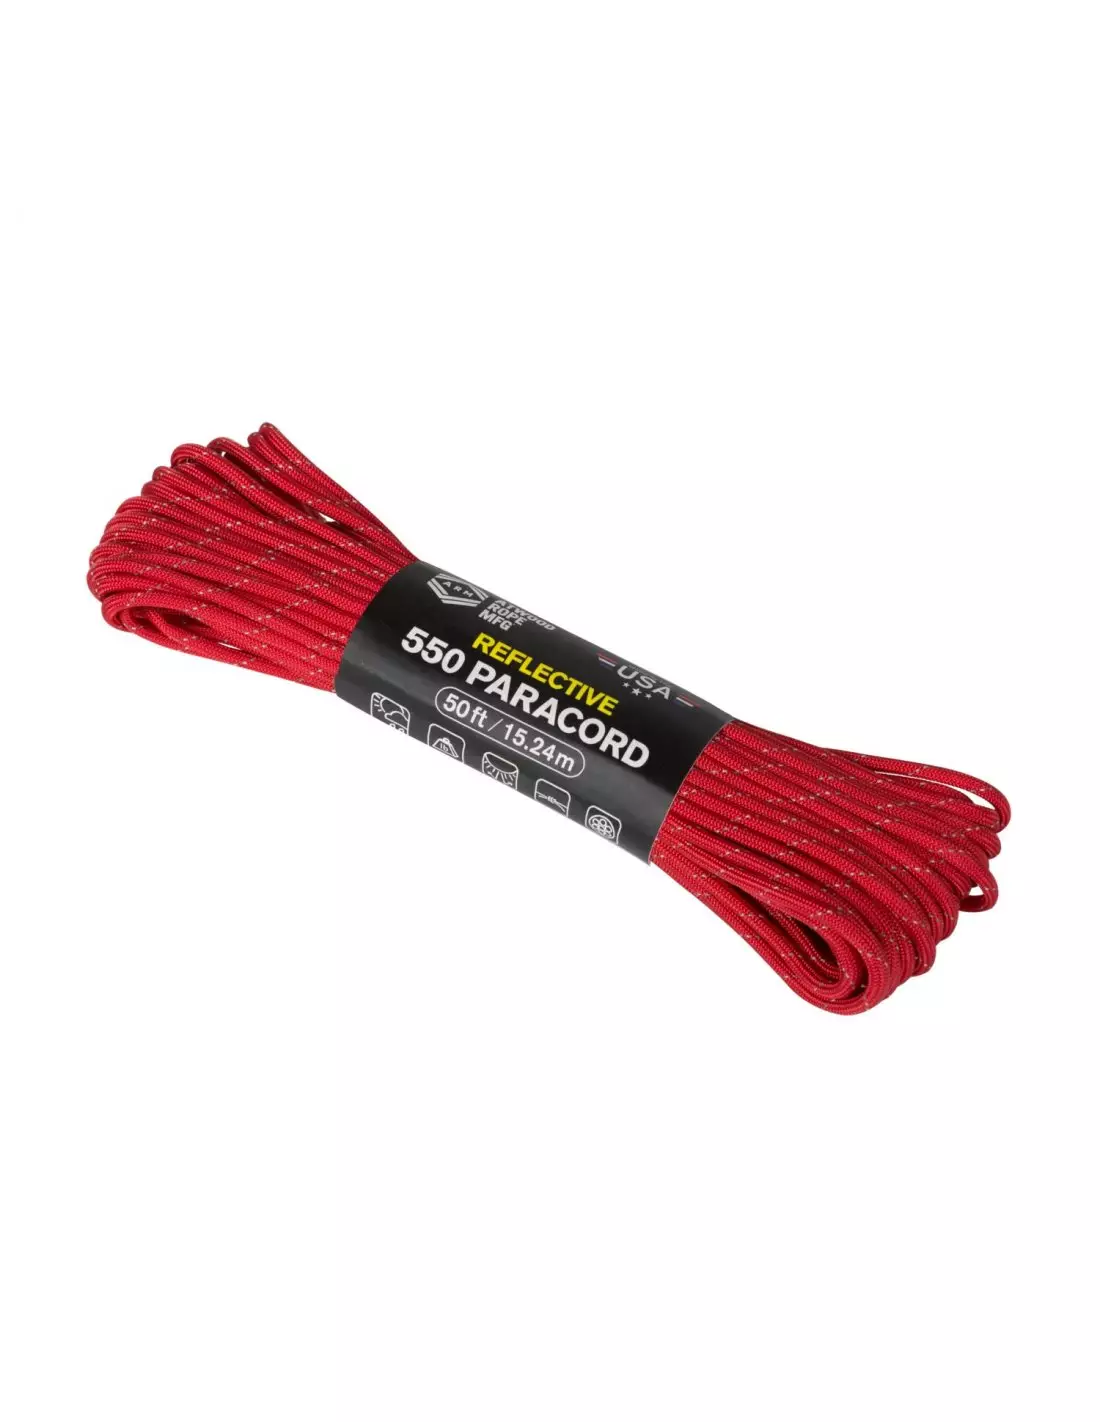 Atwood® 550 Paracord Reflective (50FT) - Red